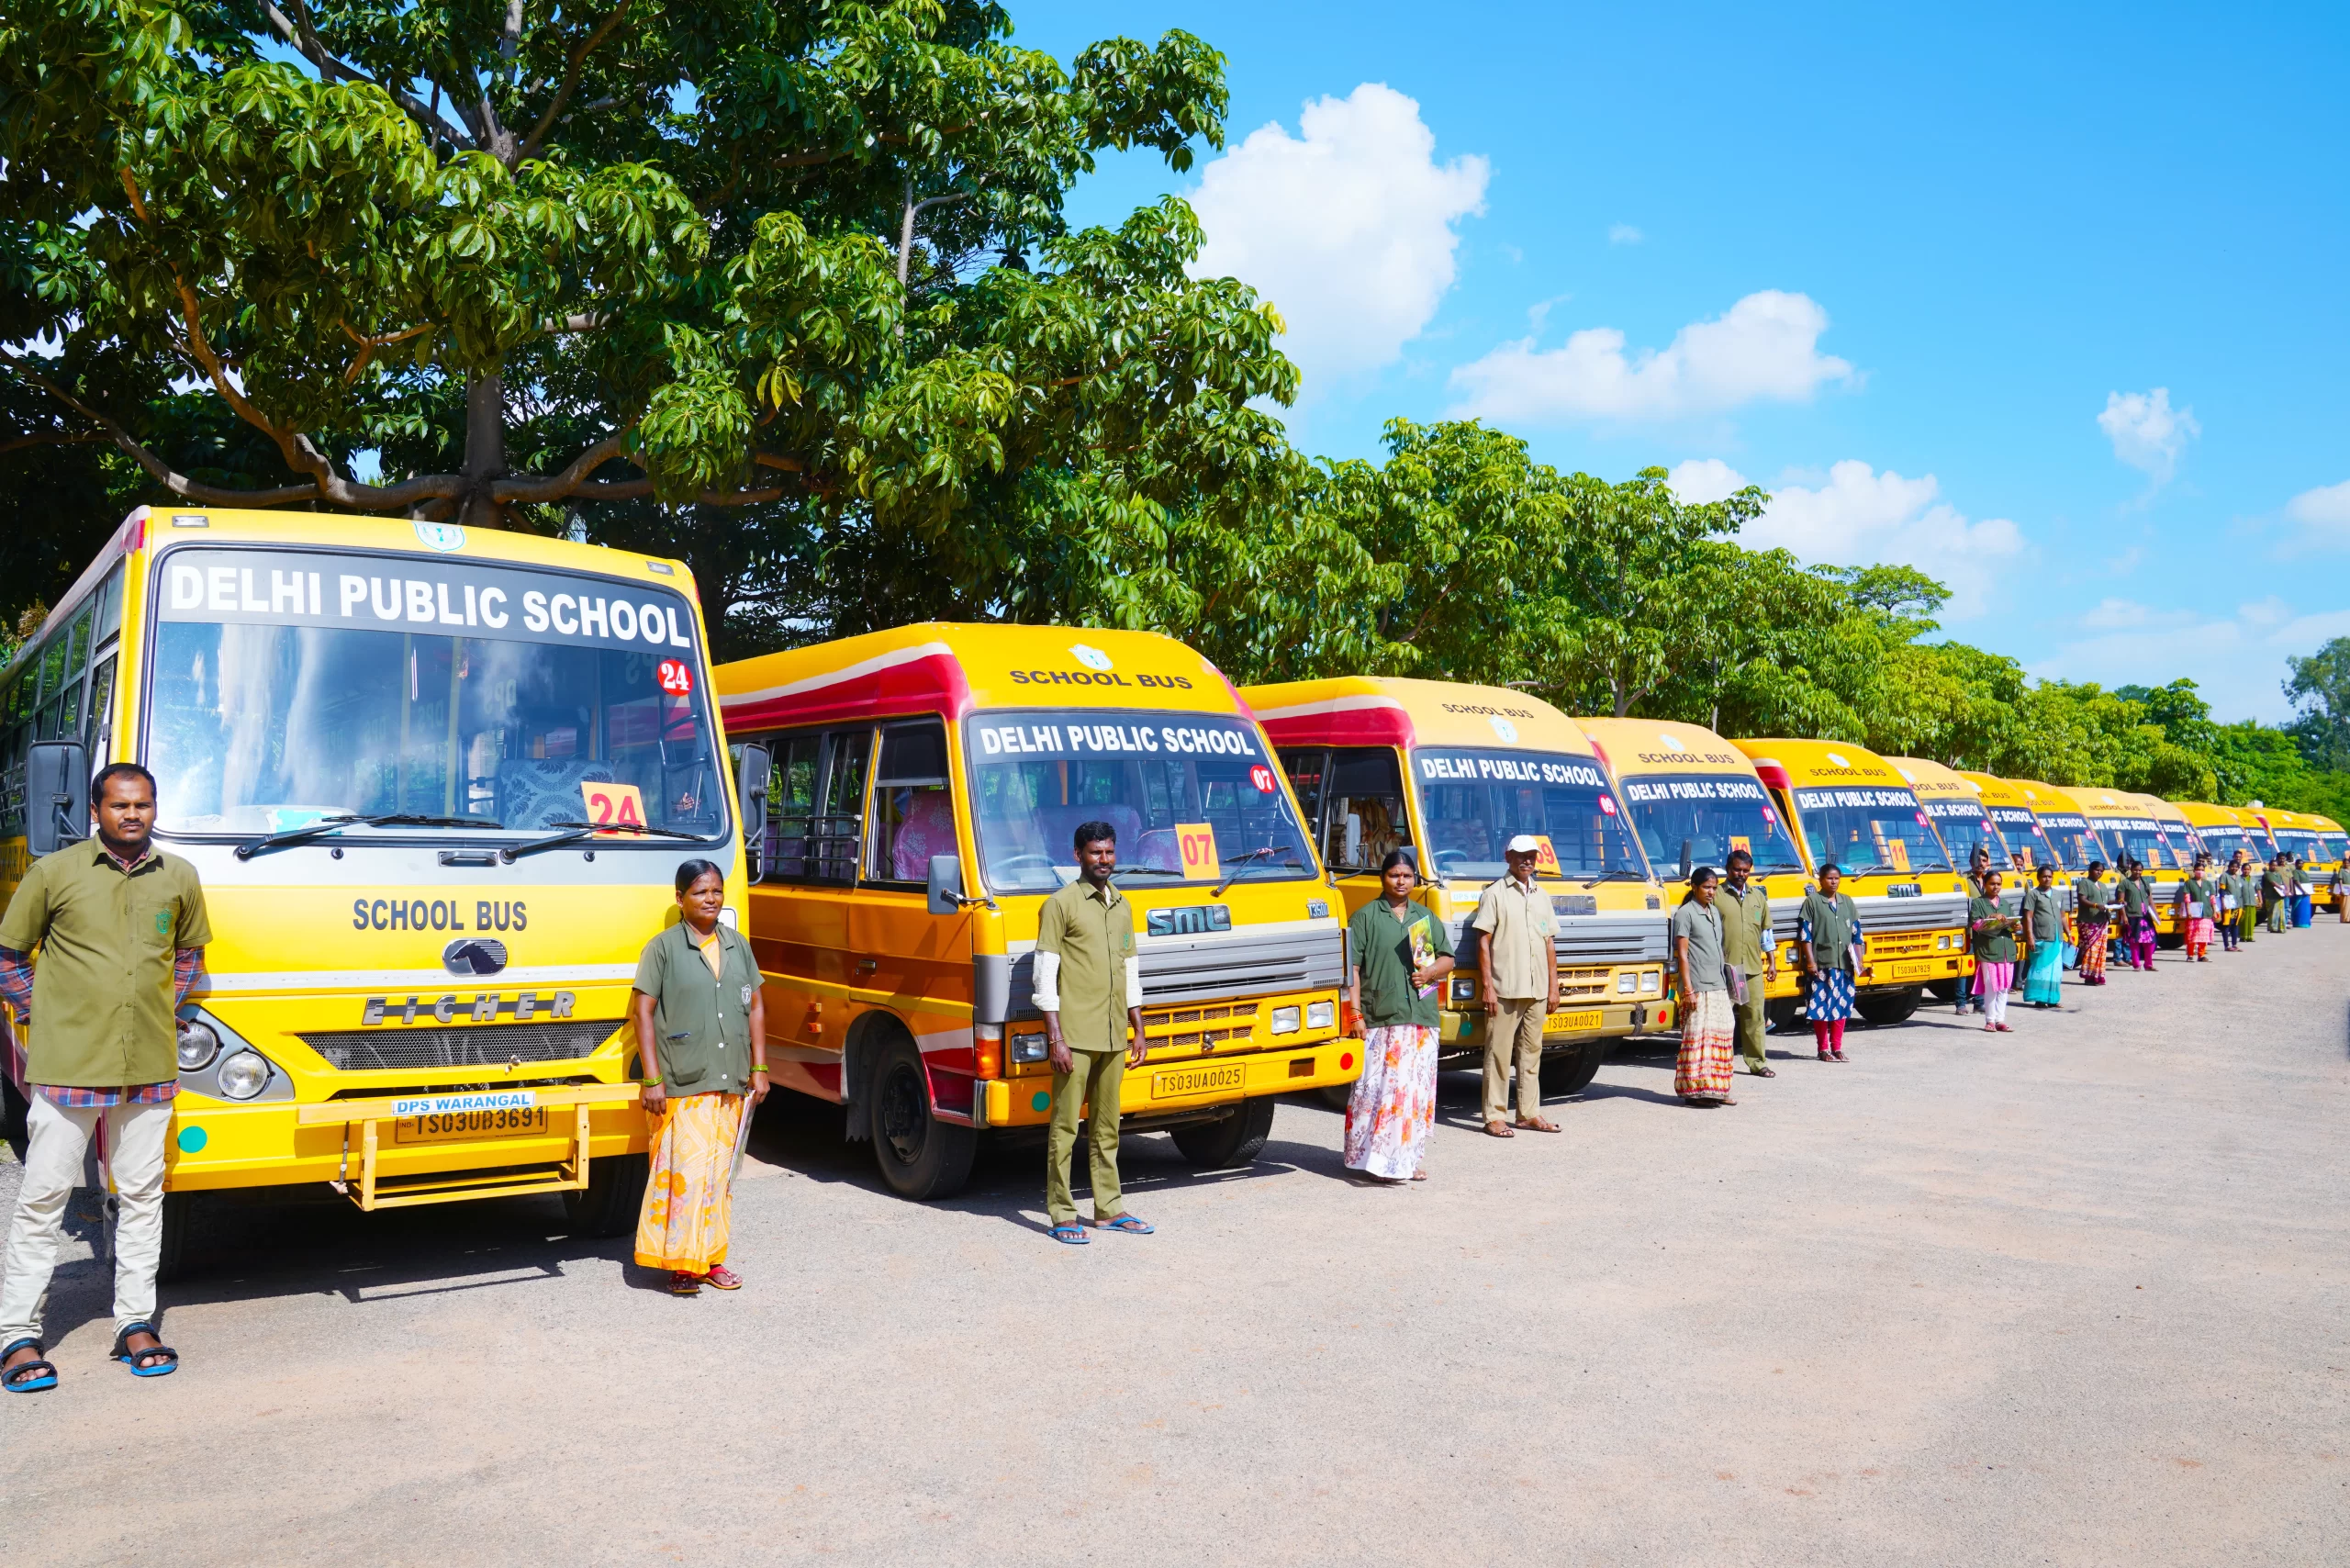 Dps Warangal school buses standing with their drivers and attendants.